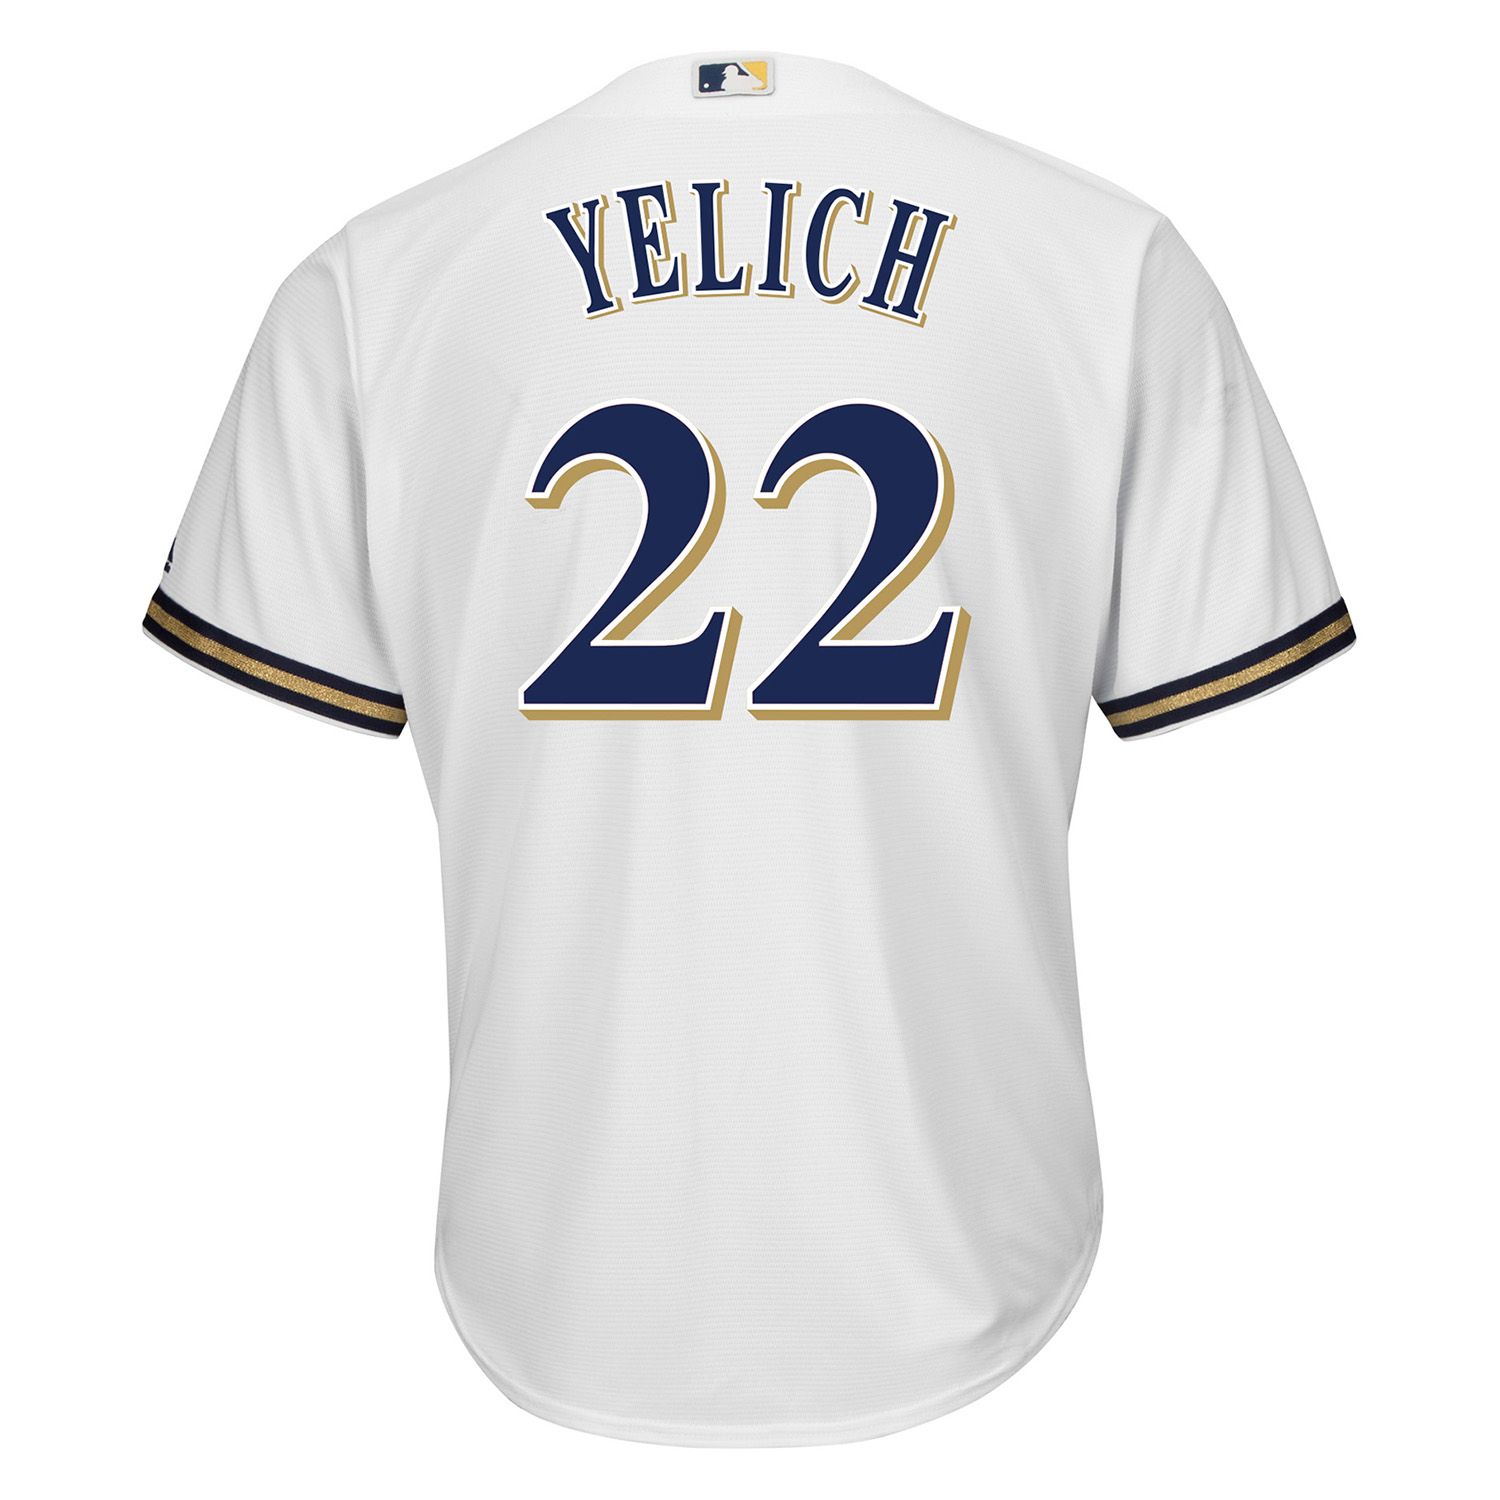 yelich youth jersey